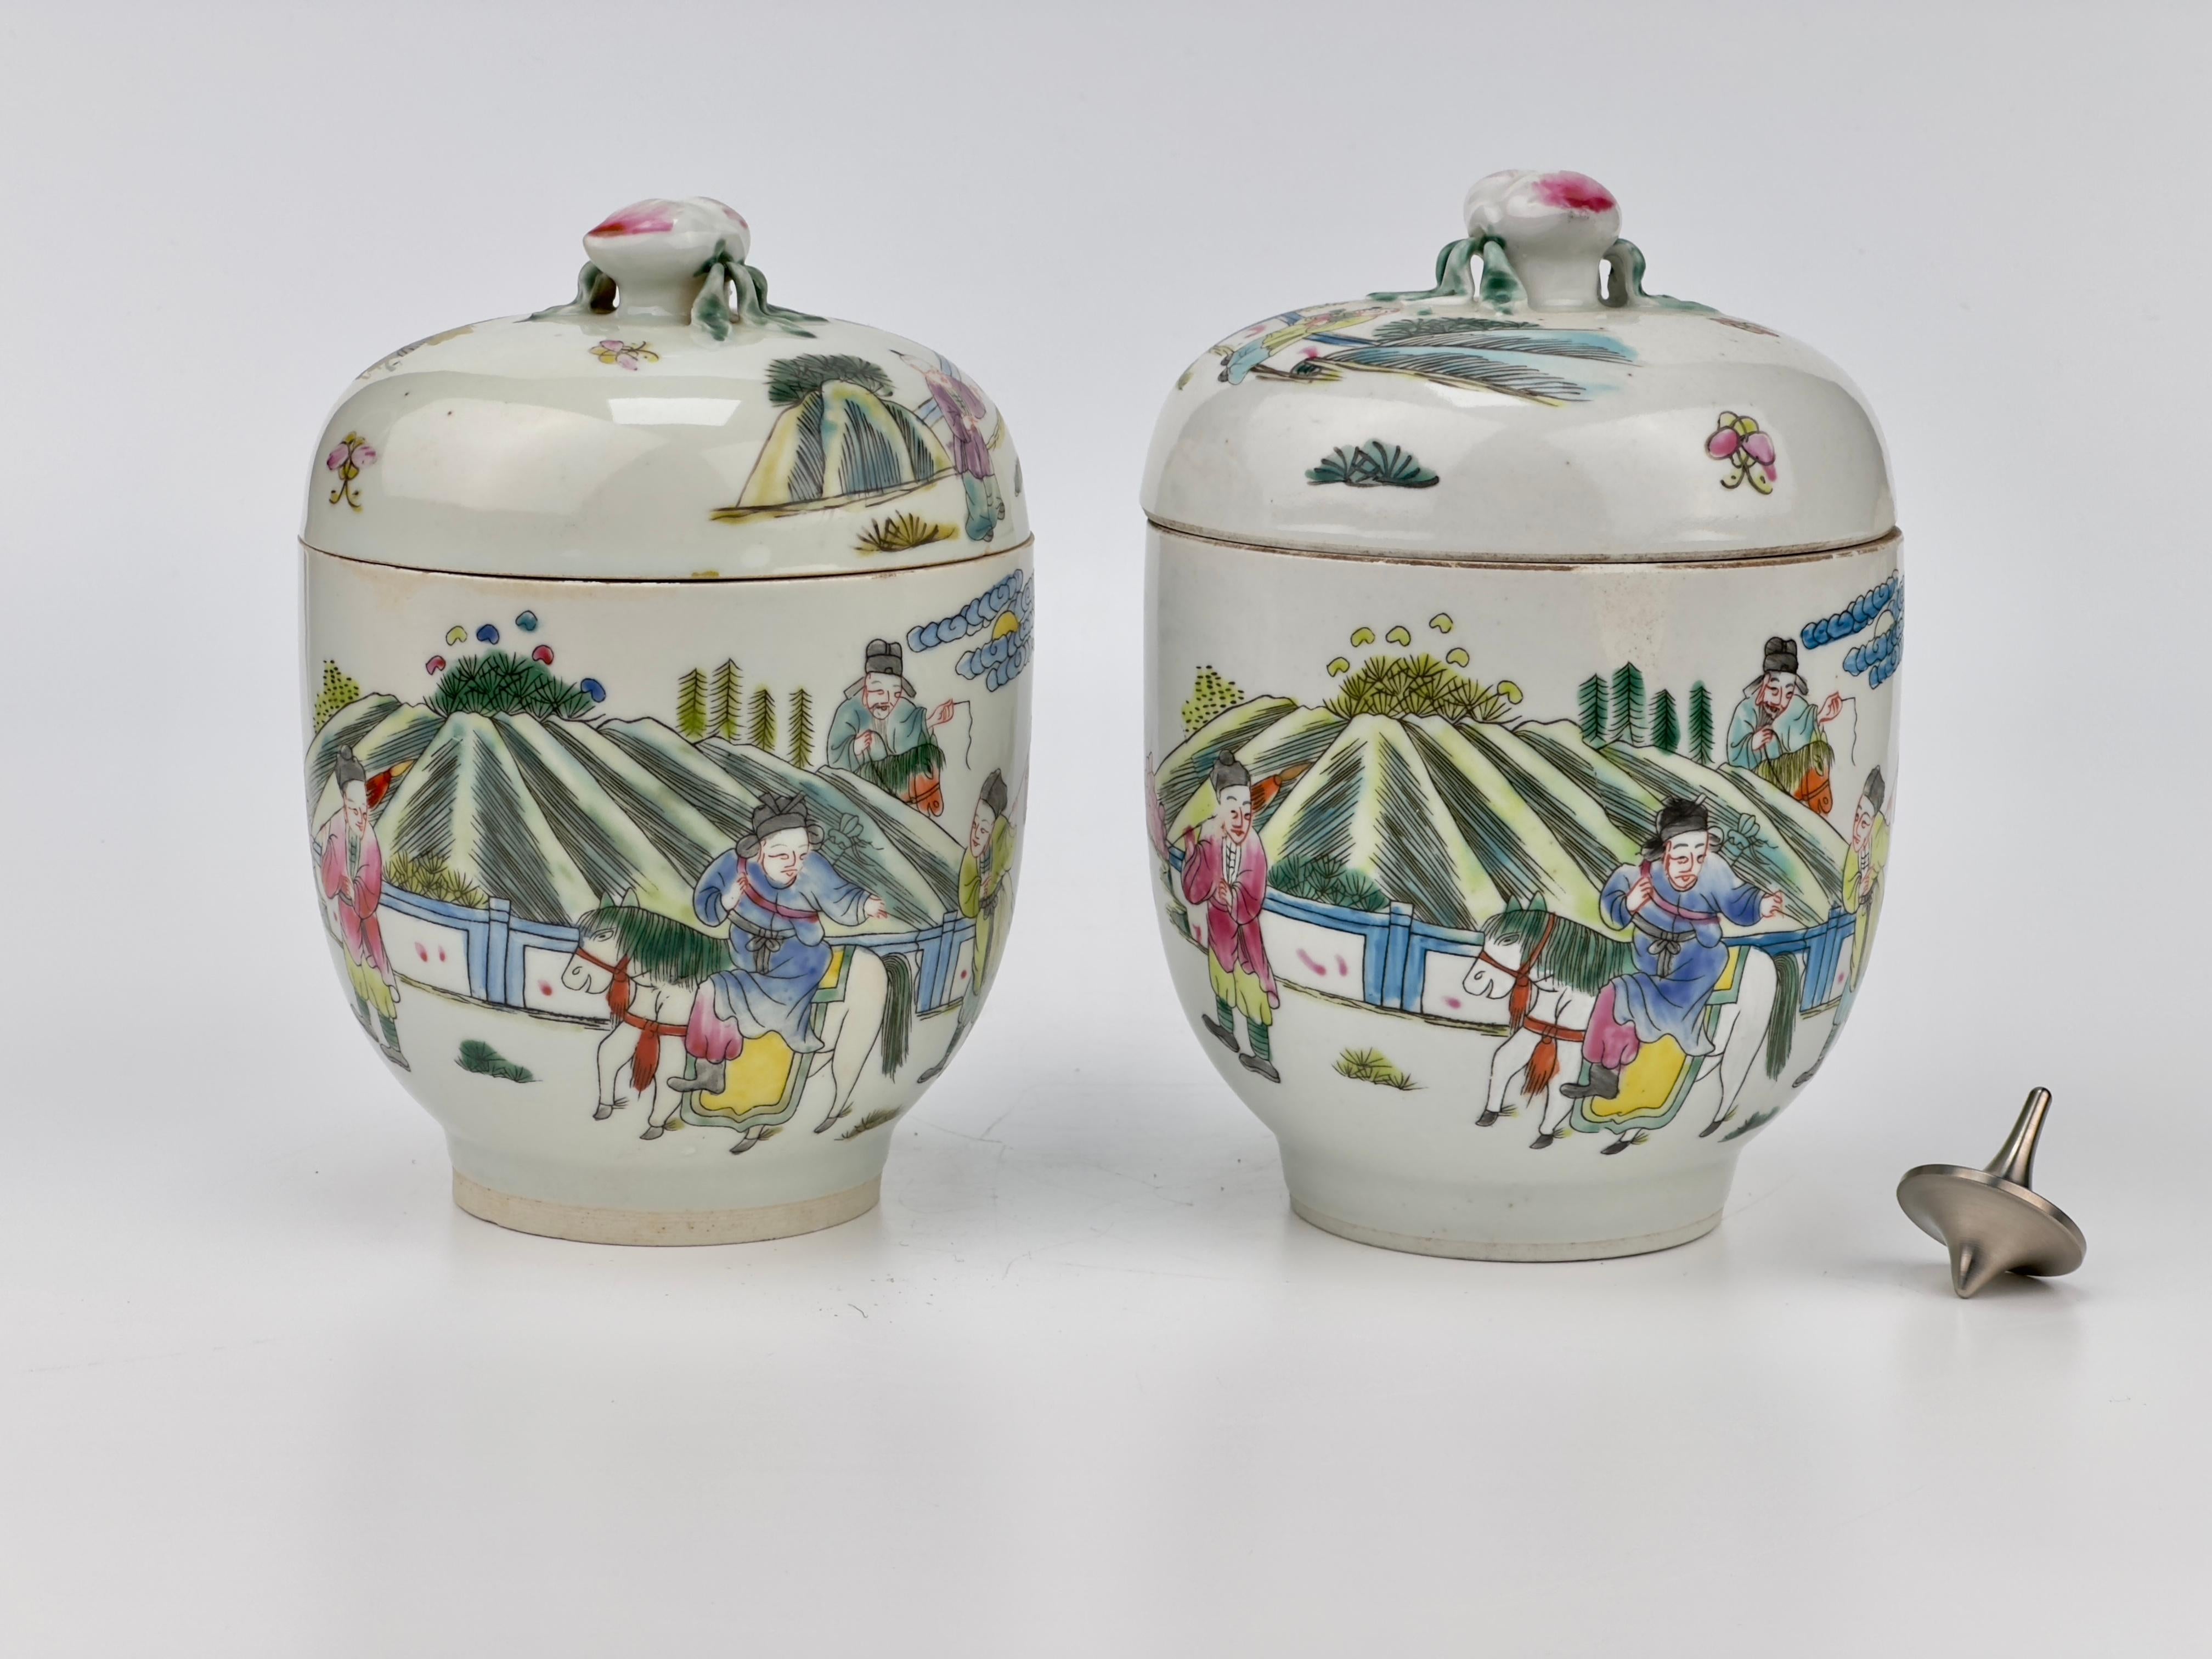 Two Chinese Famille Verte Jars with Horseback Riding, Qing Period, Tongzhi Era For Sale 7